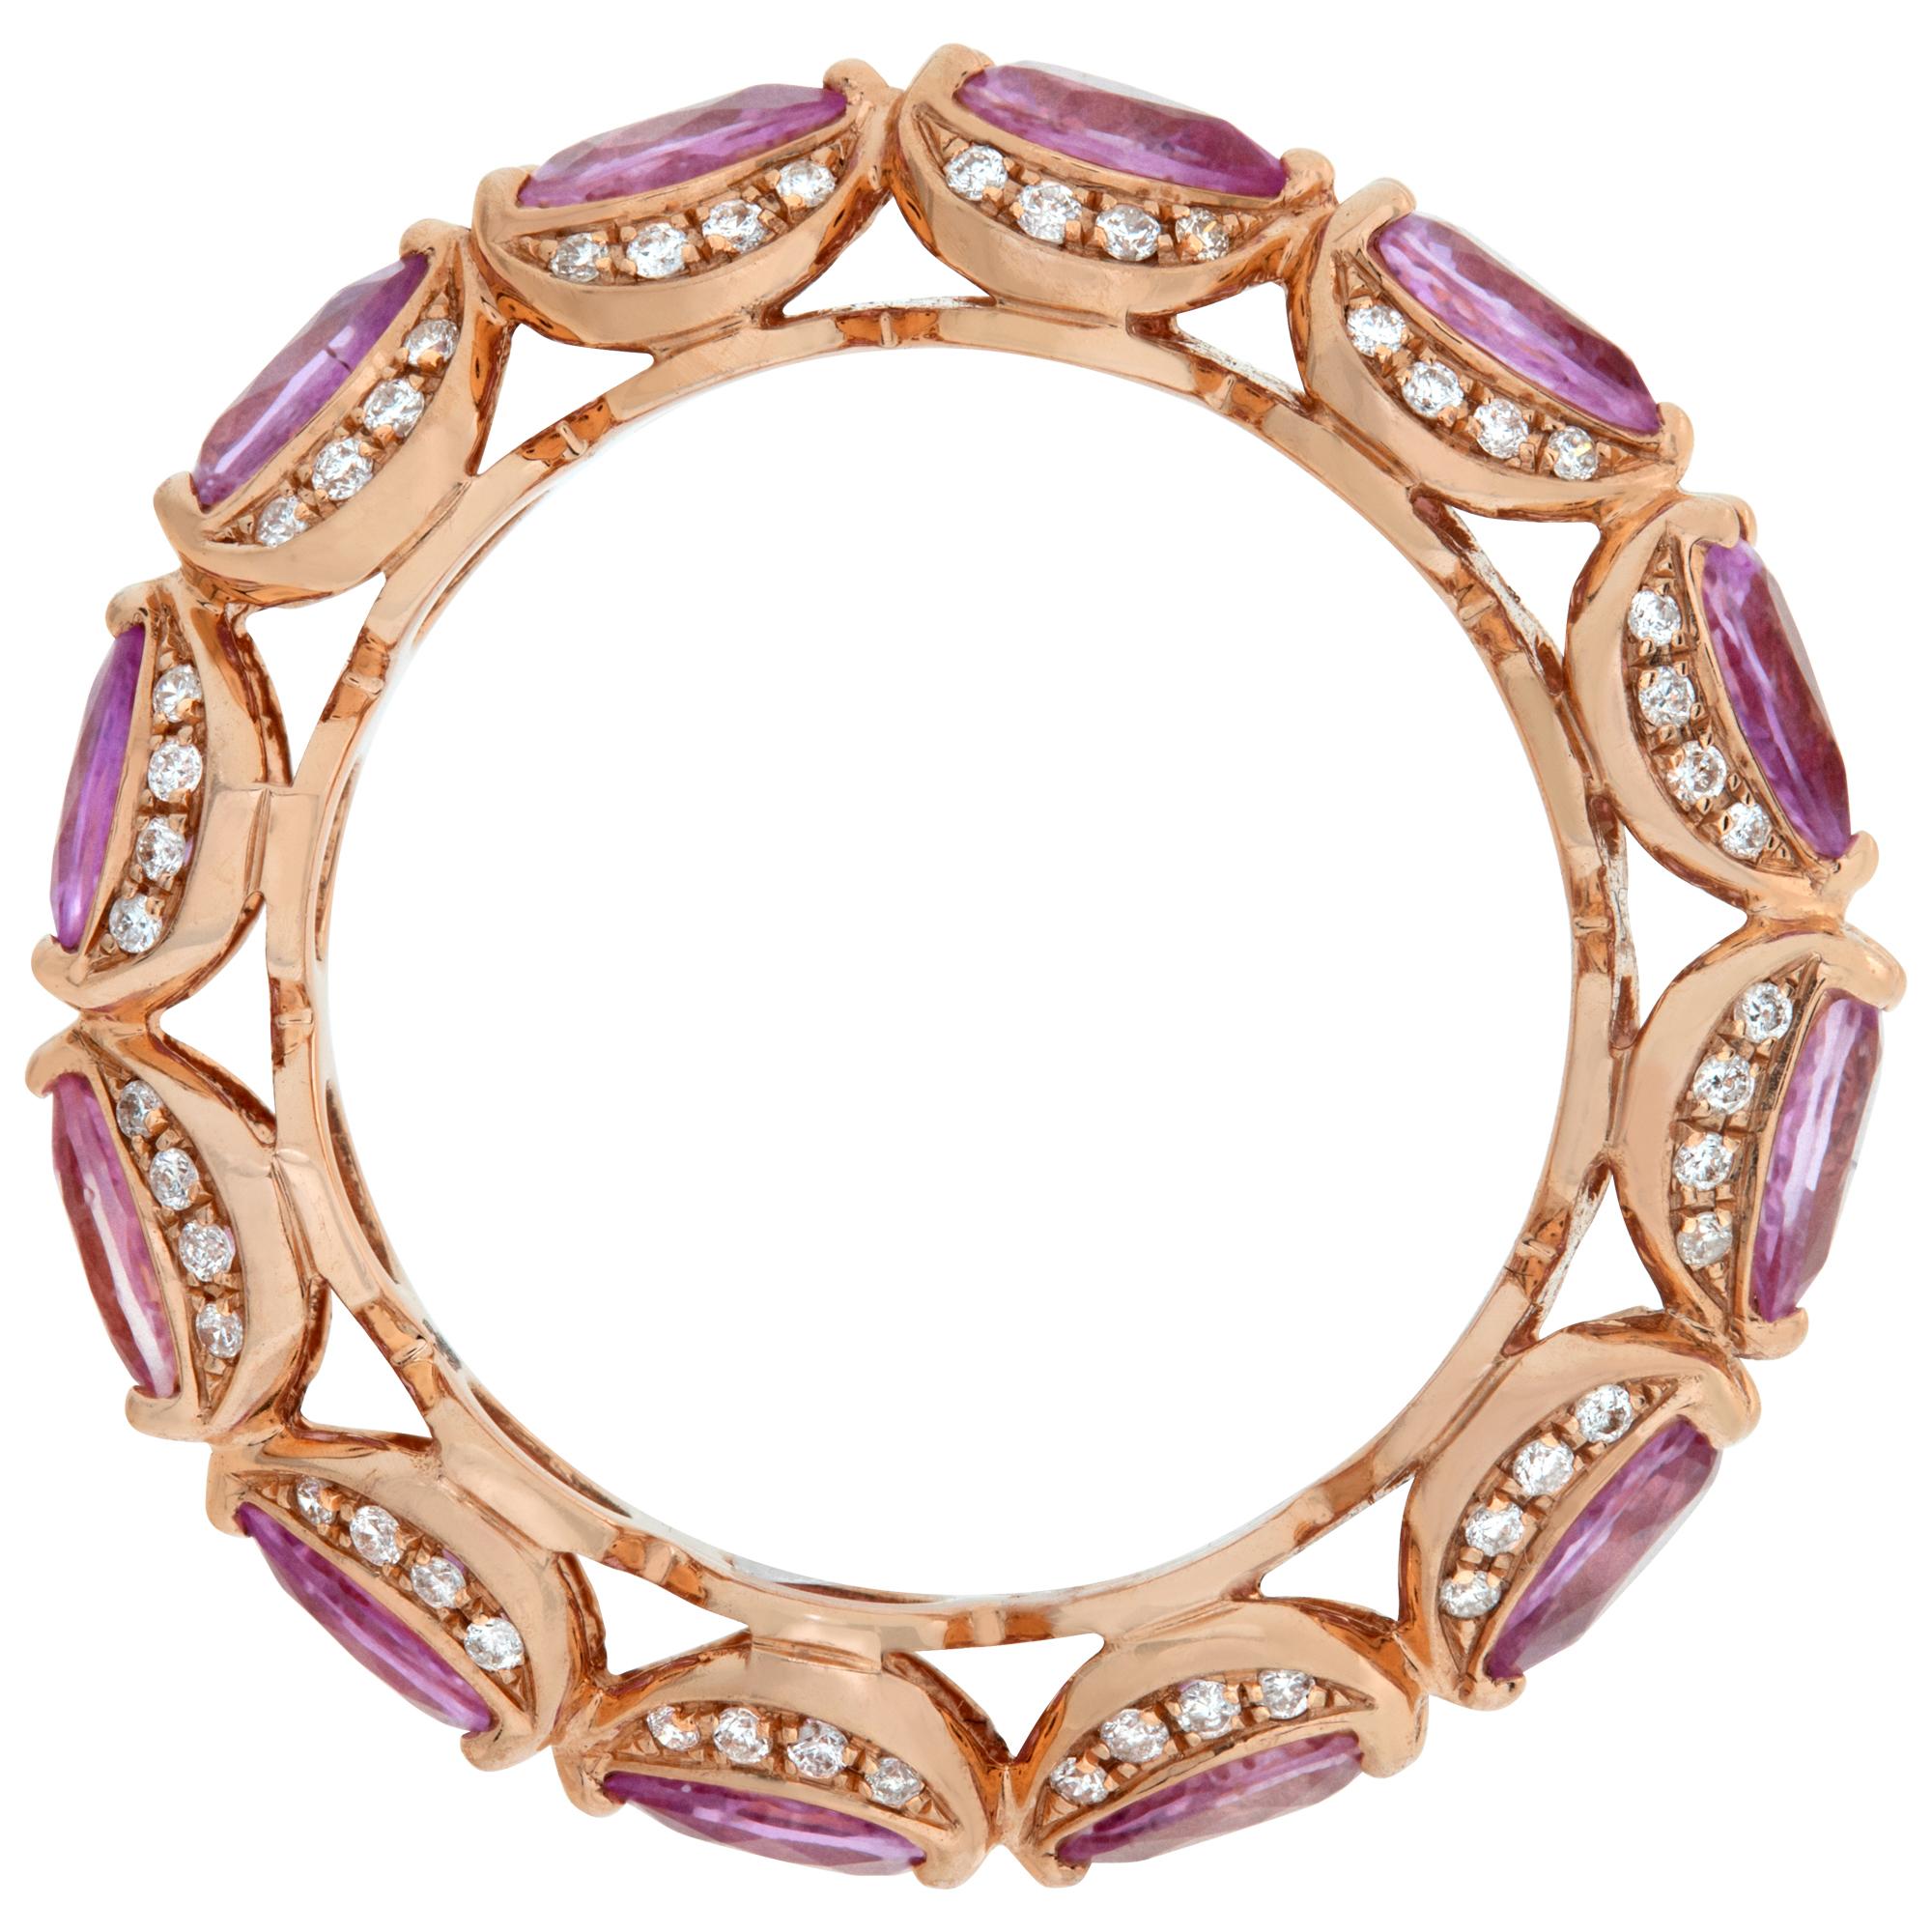 Women's Pink Sapphires and Diamond 18k Rose Gold Eternity Bands